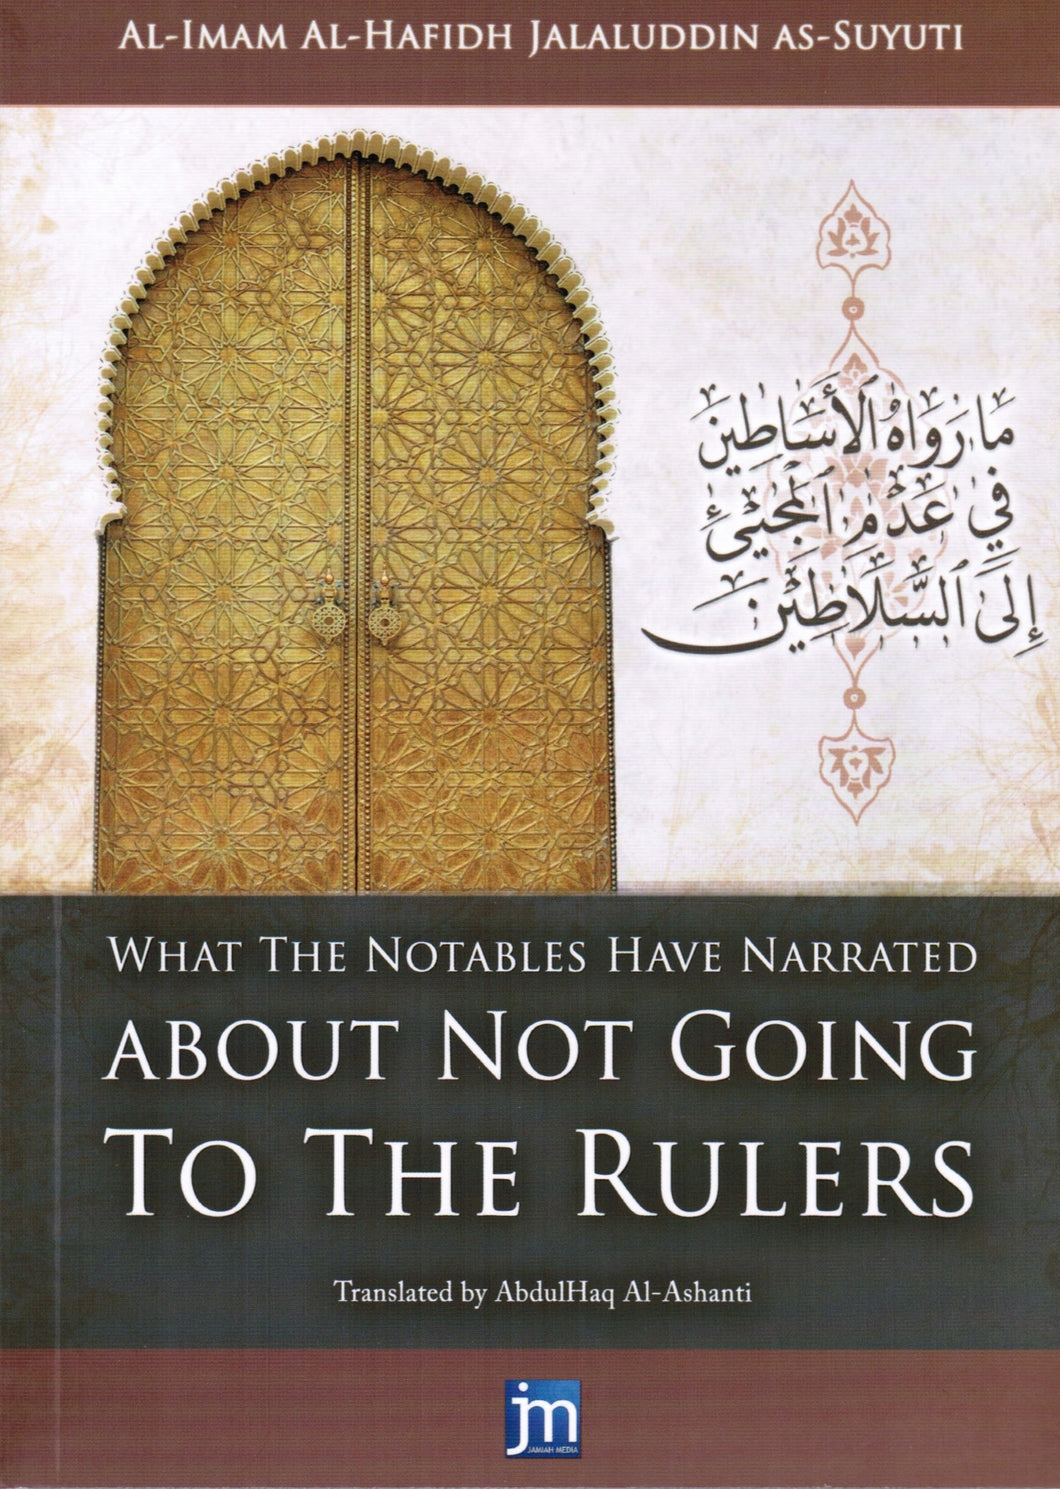 What the Notables Have Narrated About Not Going to the Rulers